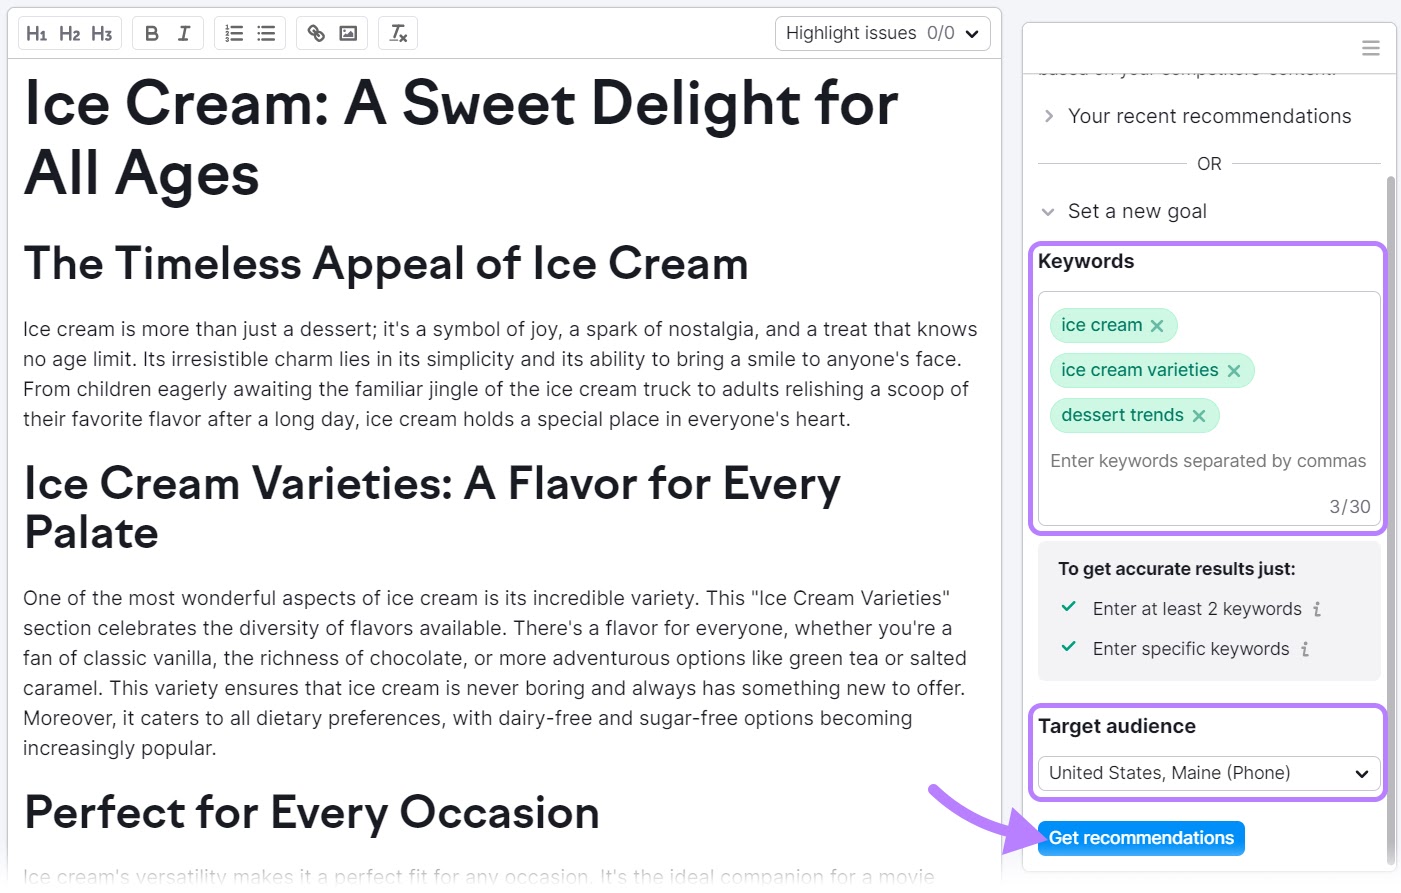 "ice cream," "ice cream varieties," and "dessert trends" keywords entered into the SEO Writing Assistant